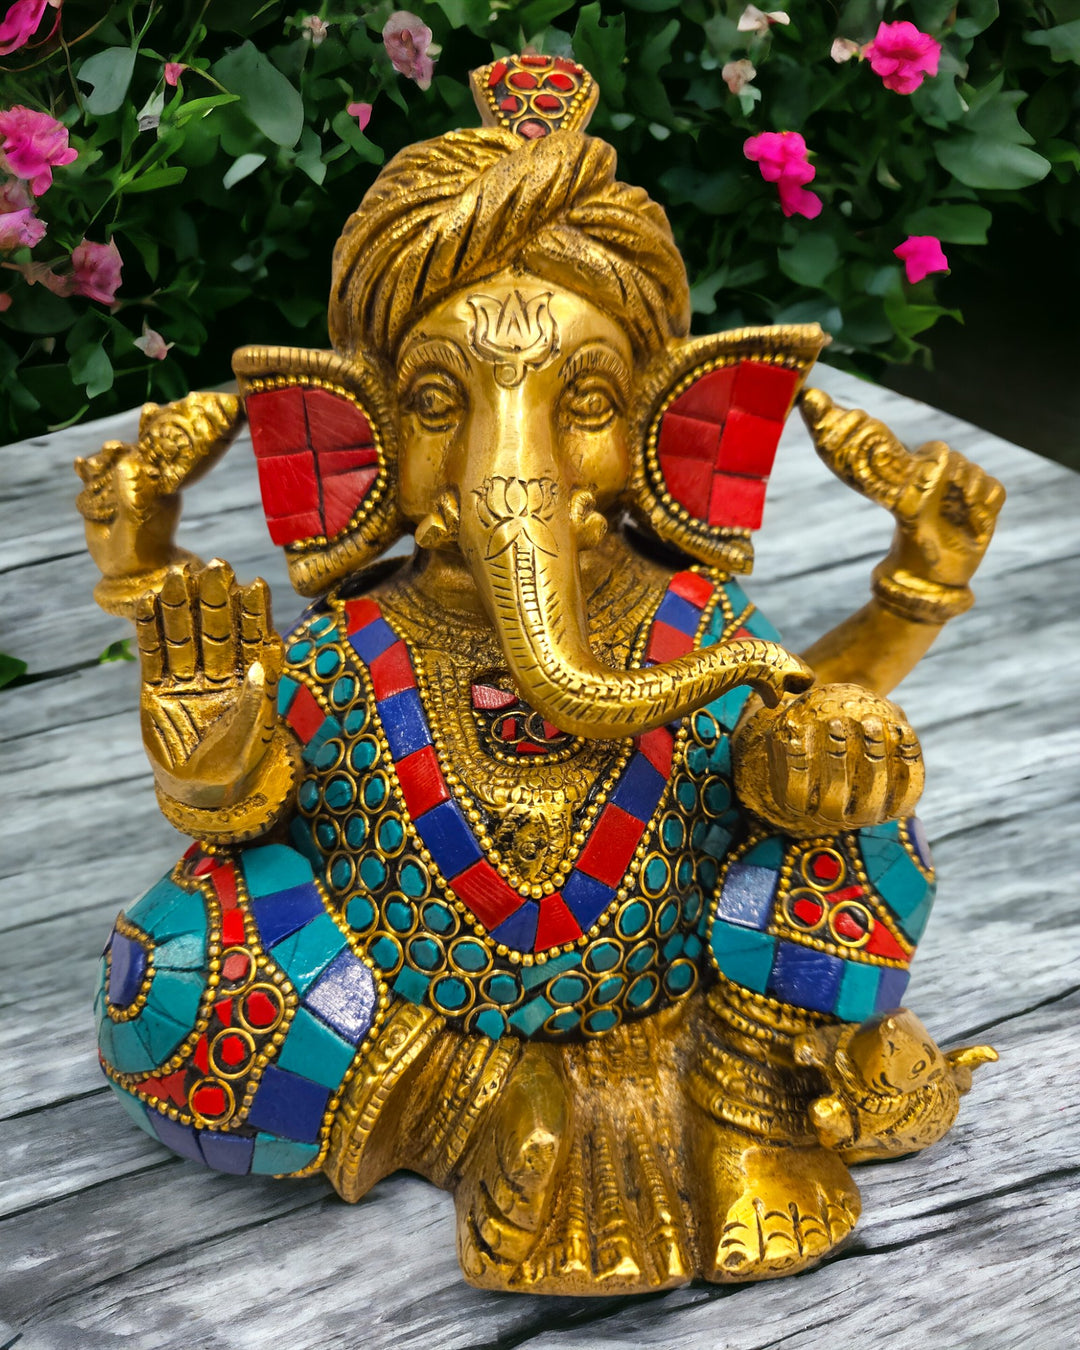 Tamas brass Ganesha adorned with turquoise stones and wearing a turban idol/statue (6 Inch) (Golden)